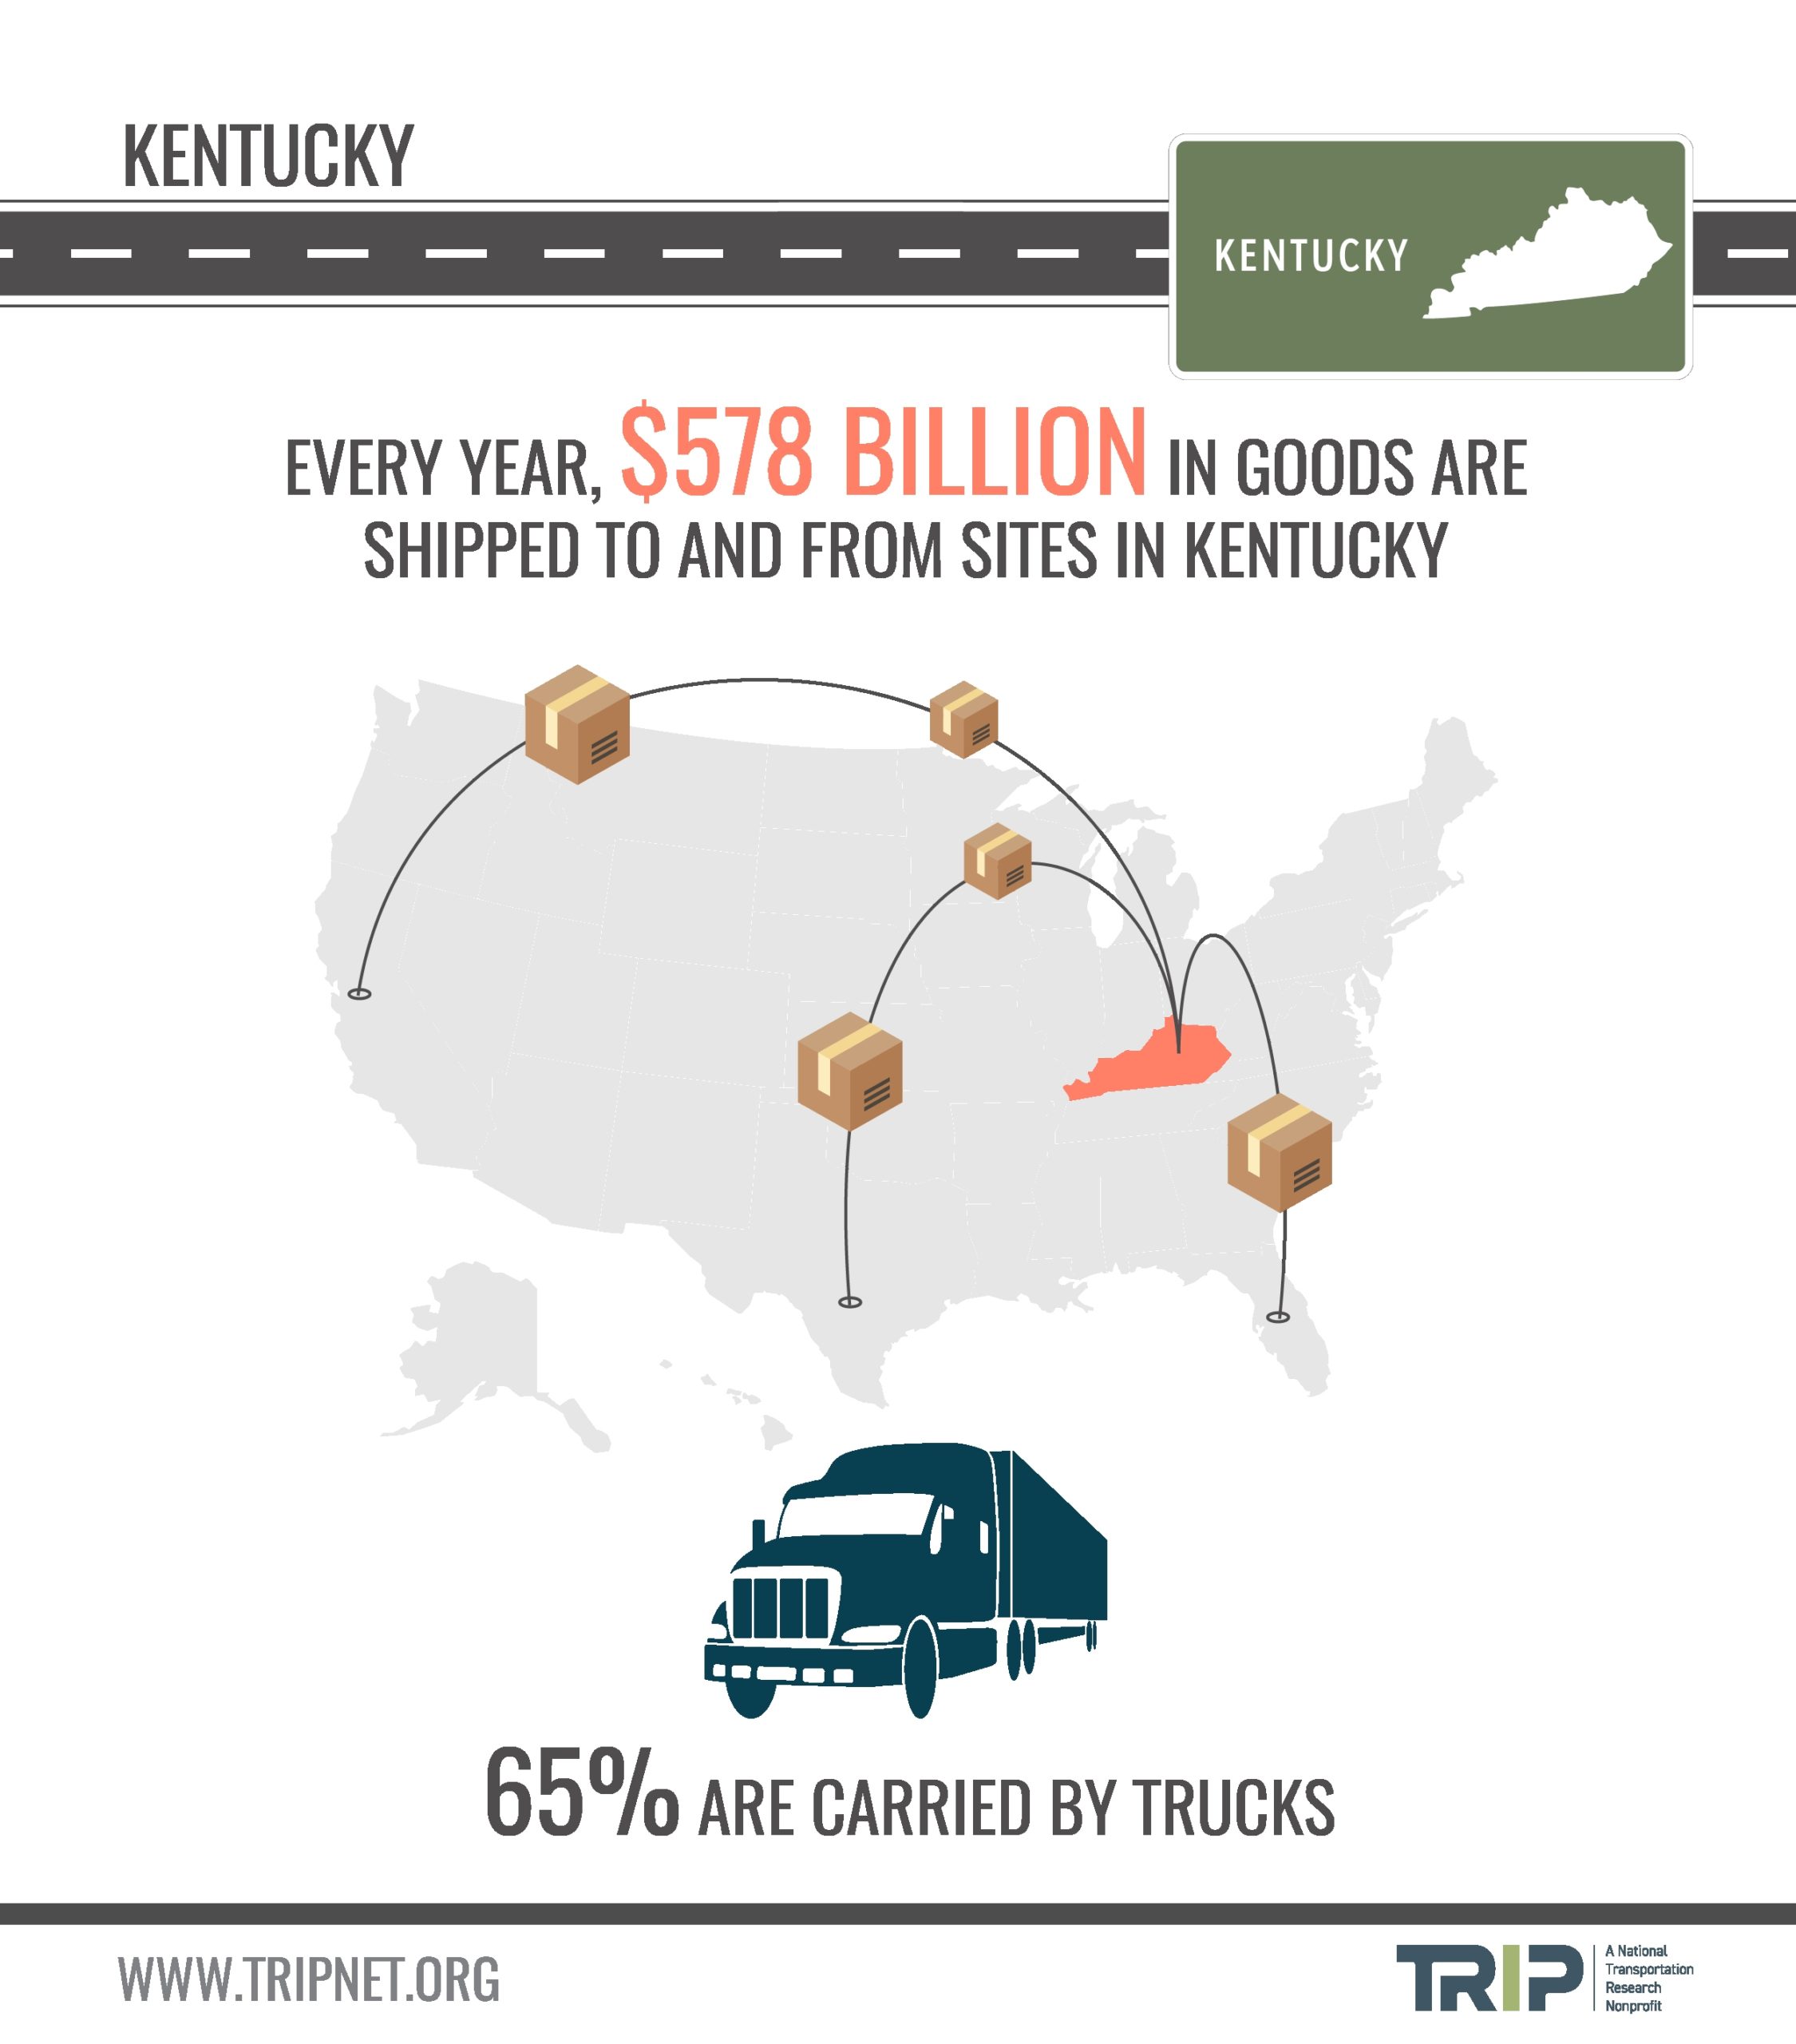 Kentucky’s Goods Shipped Infographic – March 2020